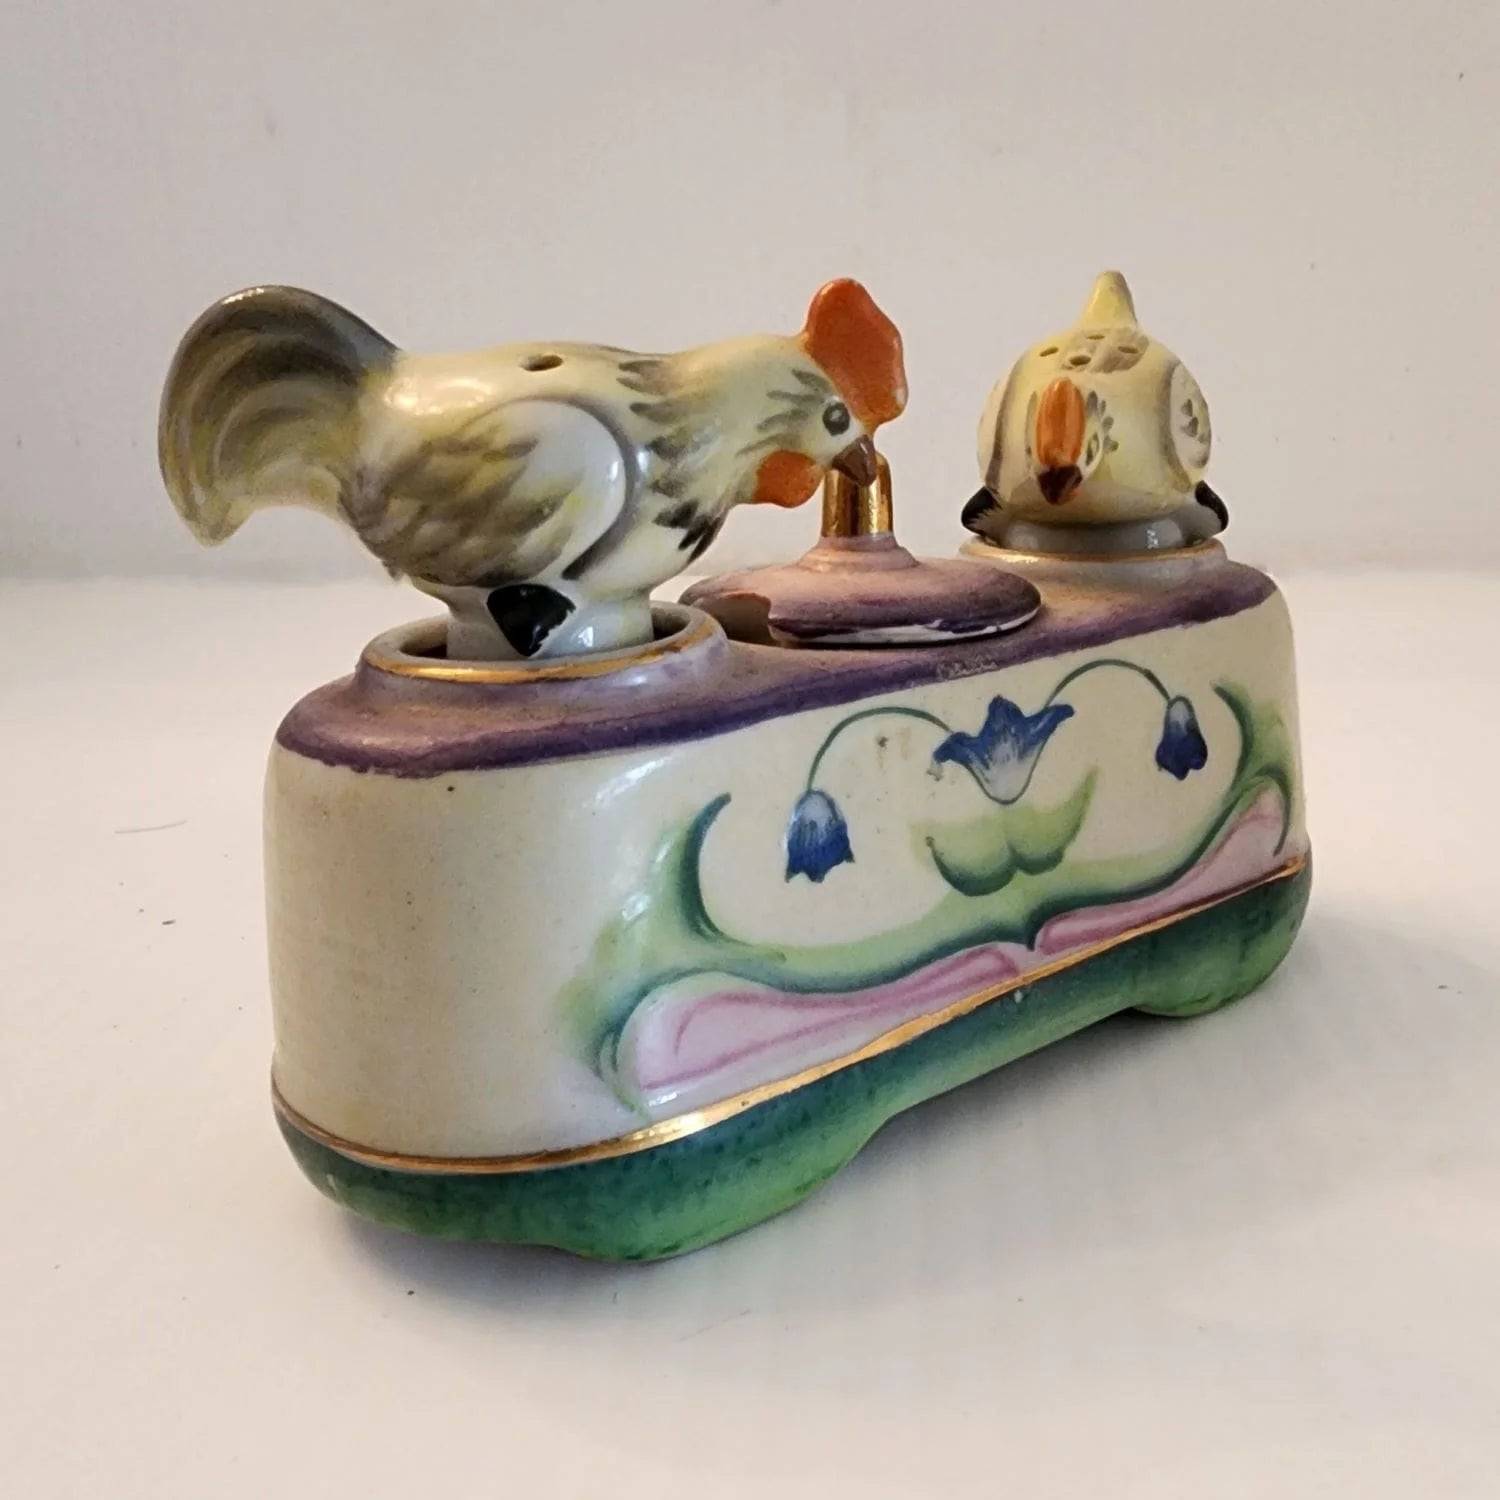 Ceramic box with two bobble birds on the top